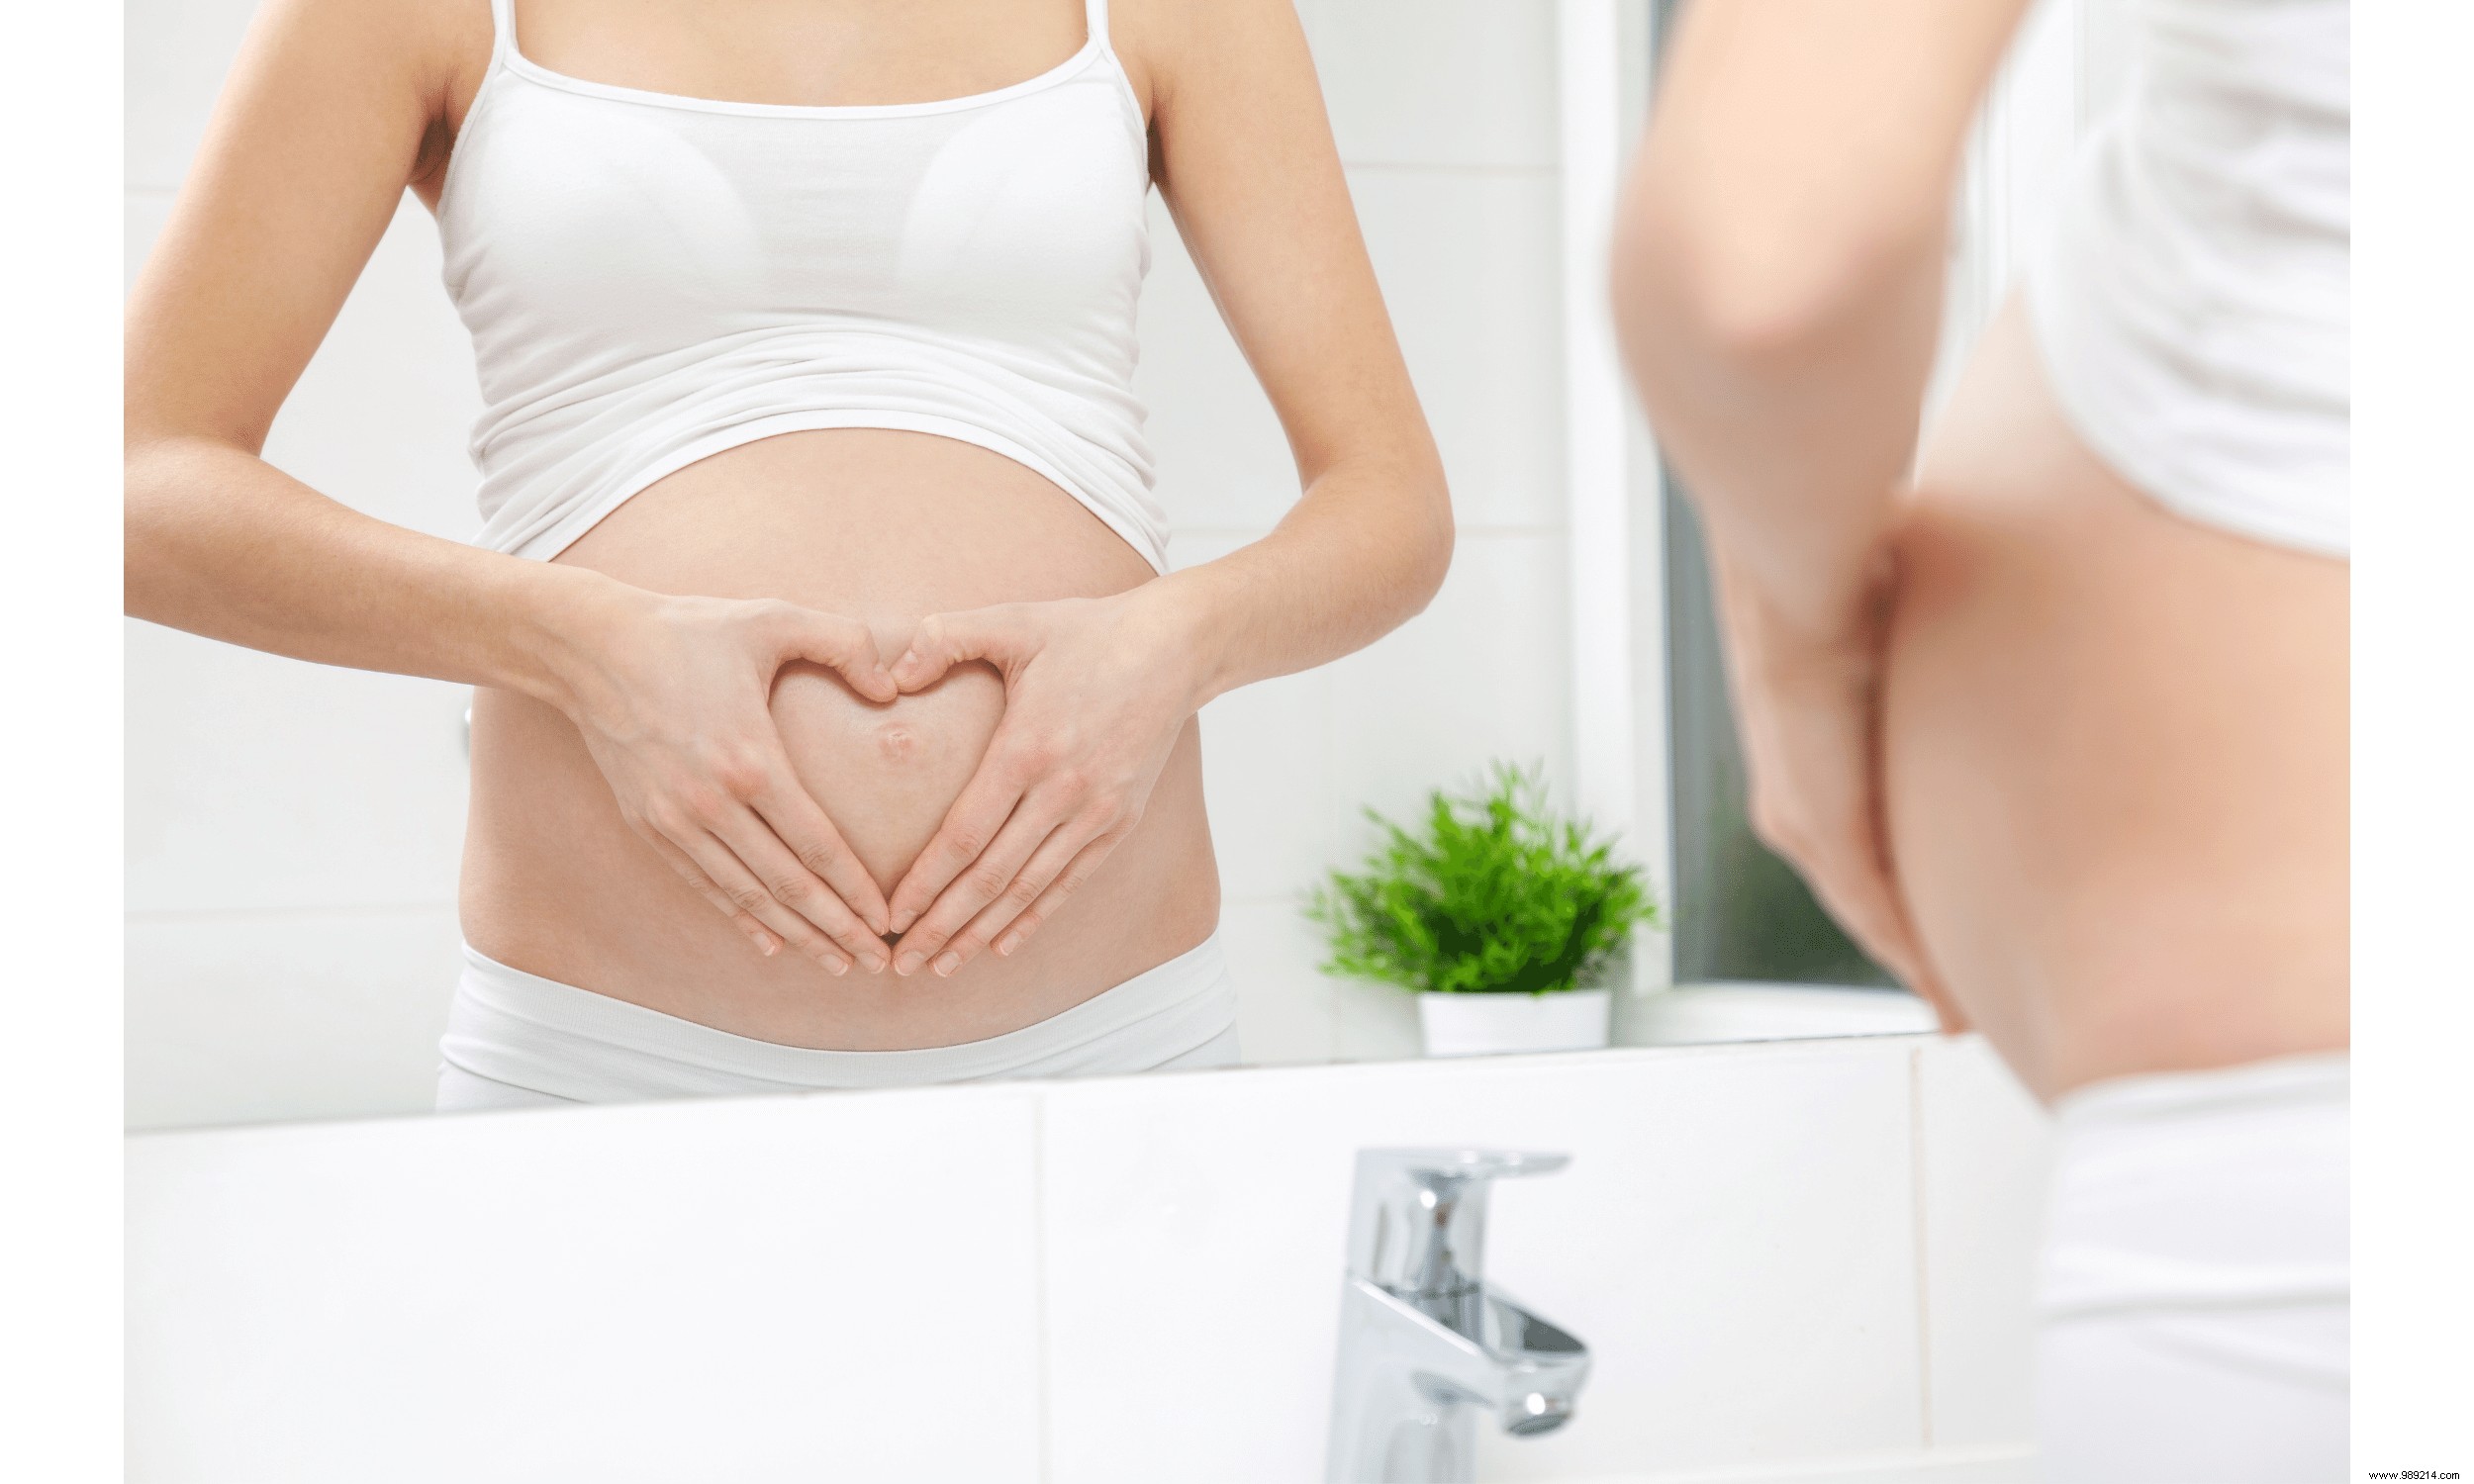 Cosmetics for pregnant women:what precautions to take? 